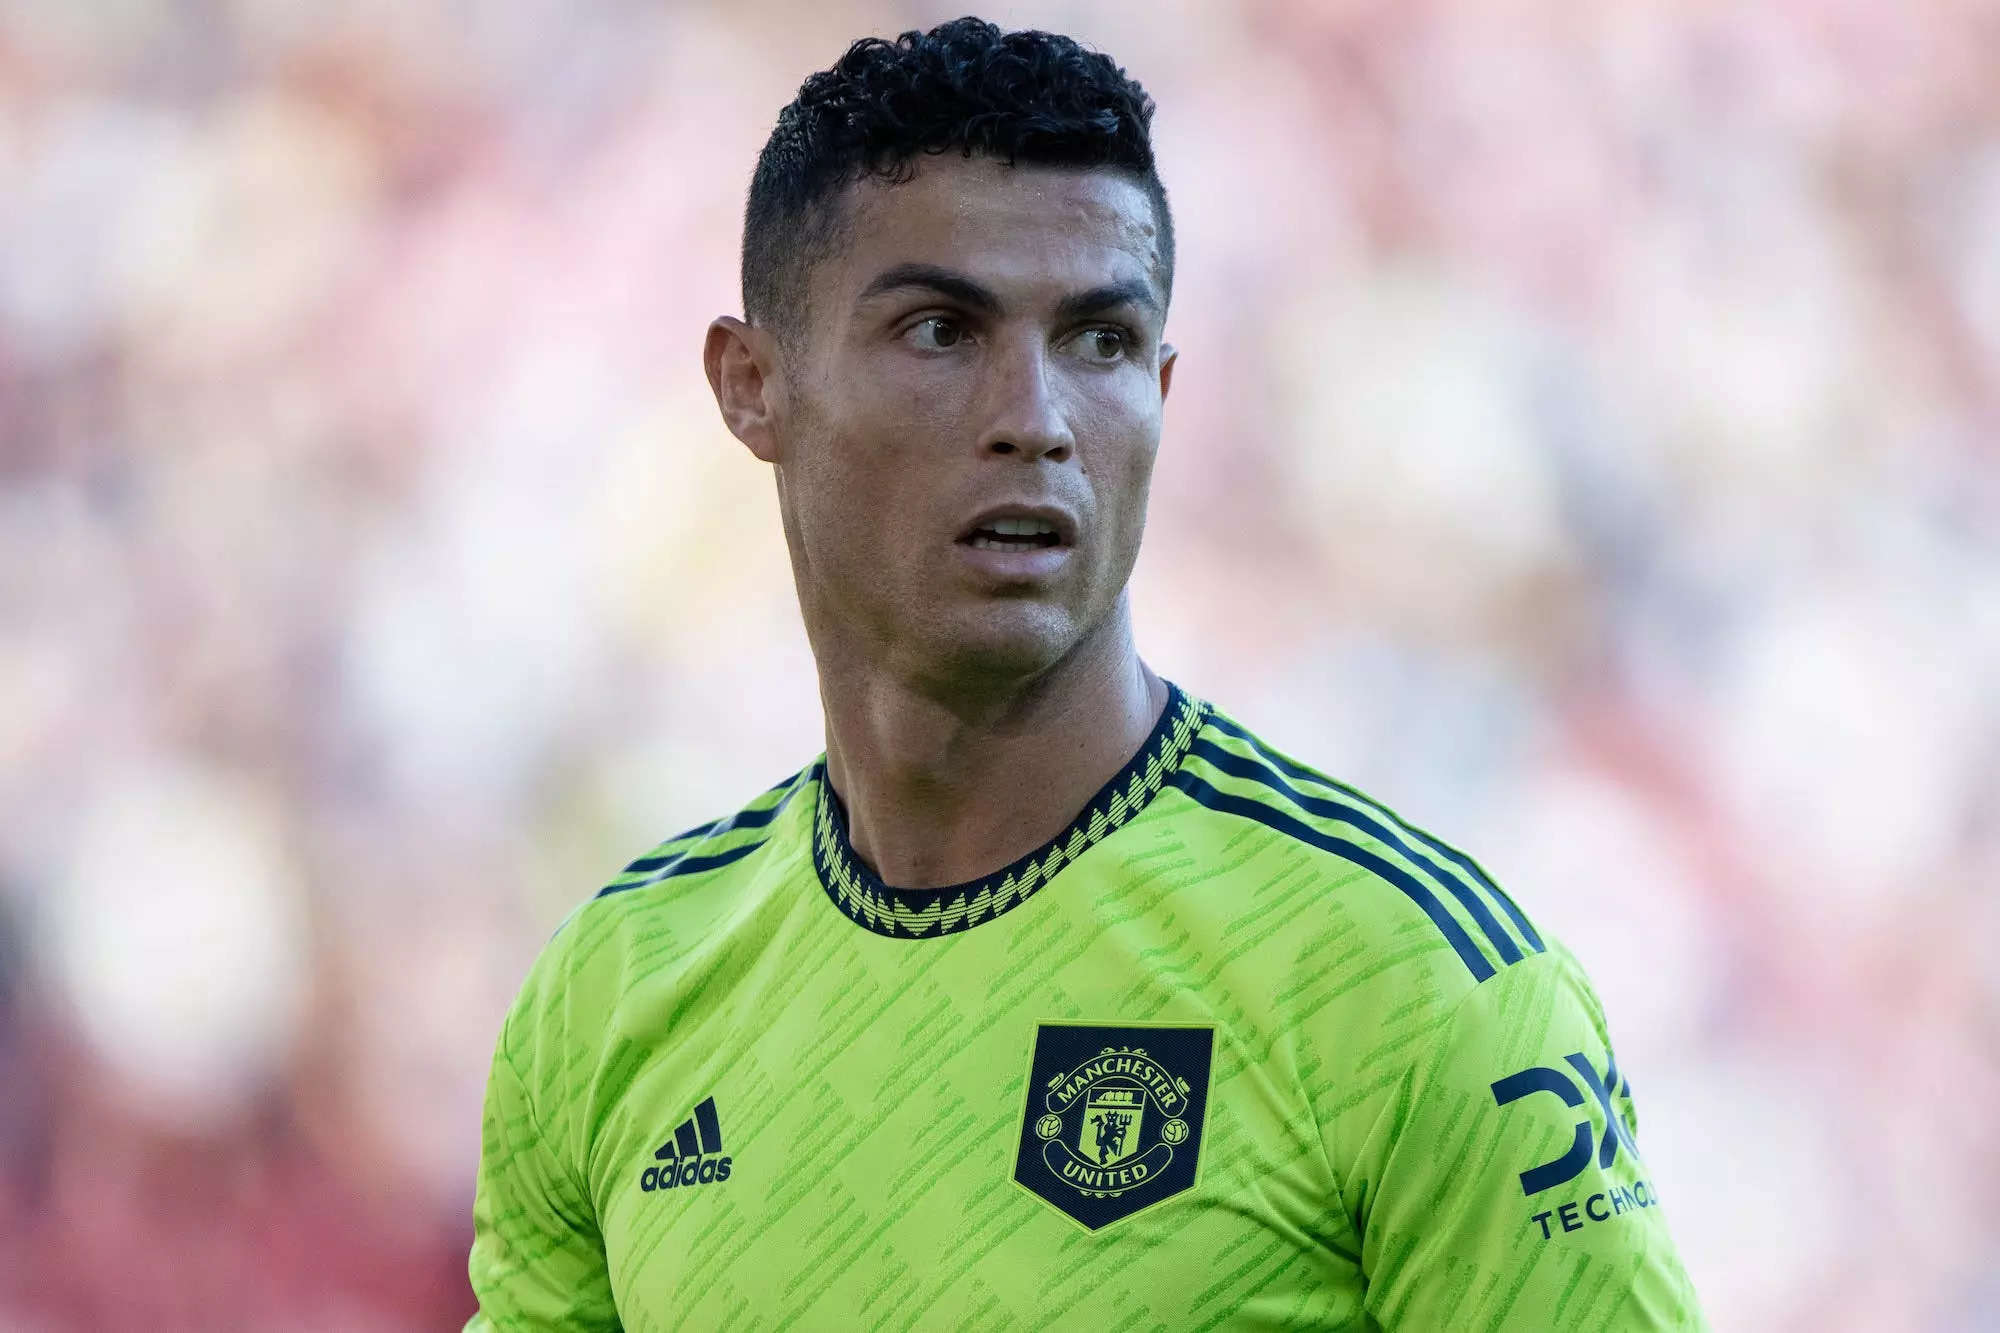 Cristiano Ronaldo of Manchester United looks on during the Premier League match between Brentford FC and Manchester United at Brentford Community Stadium.